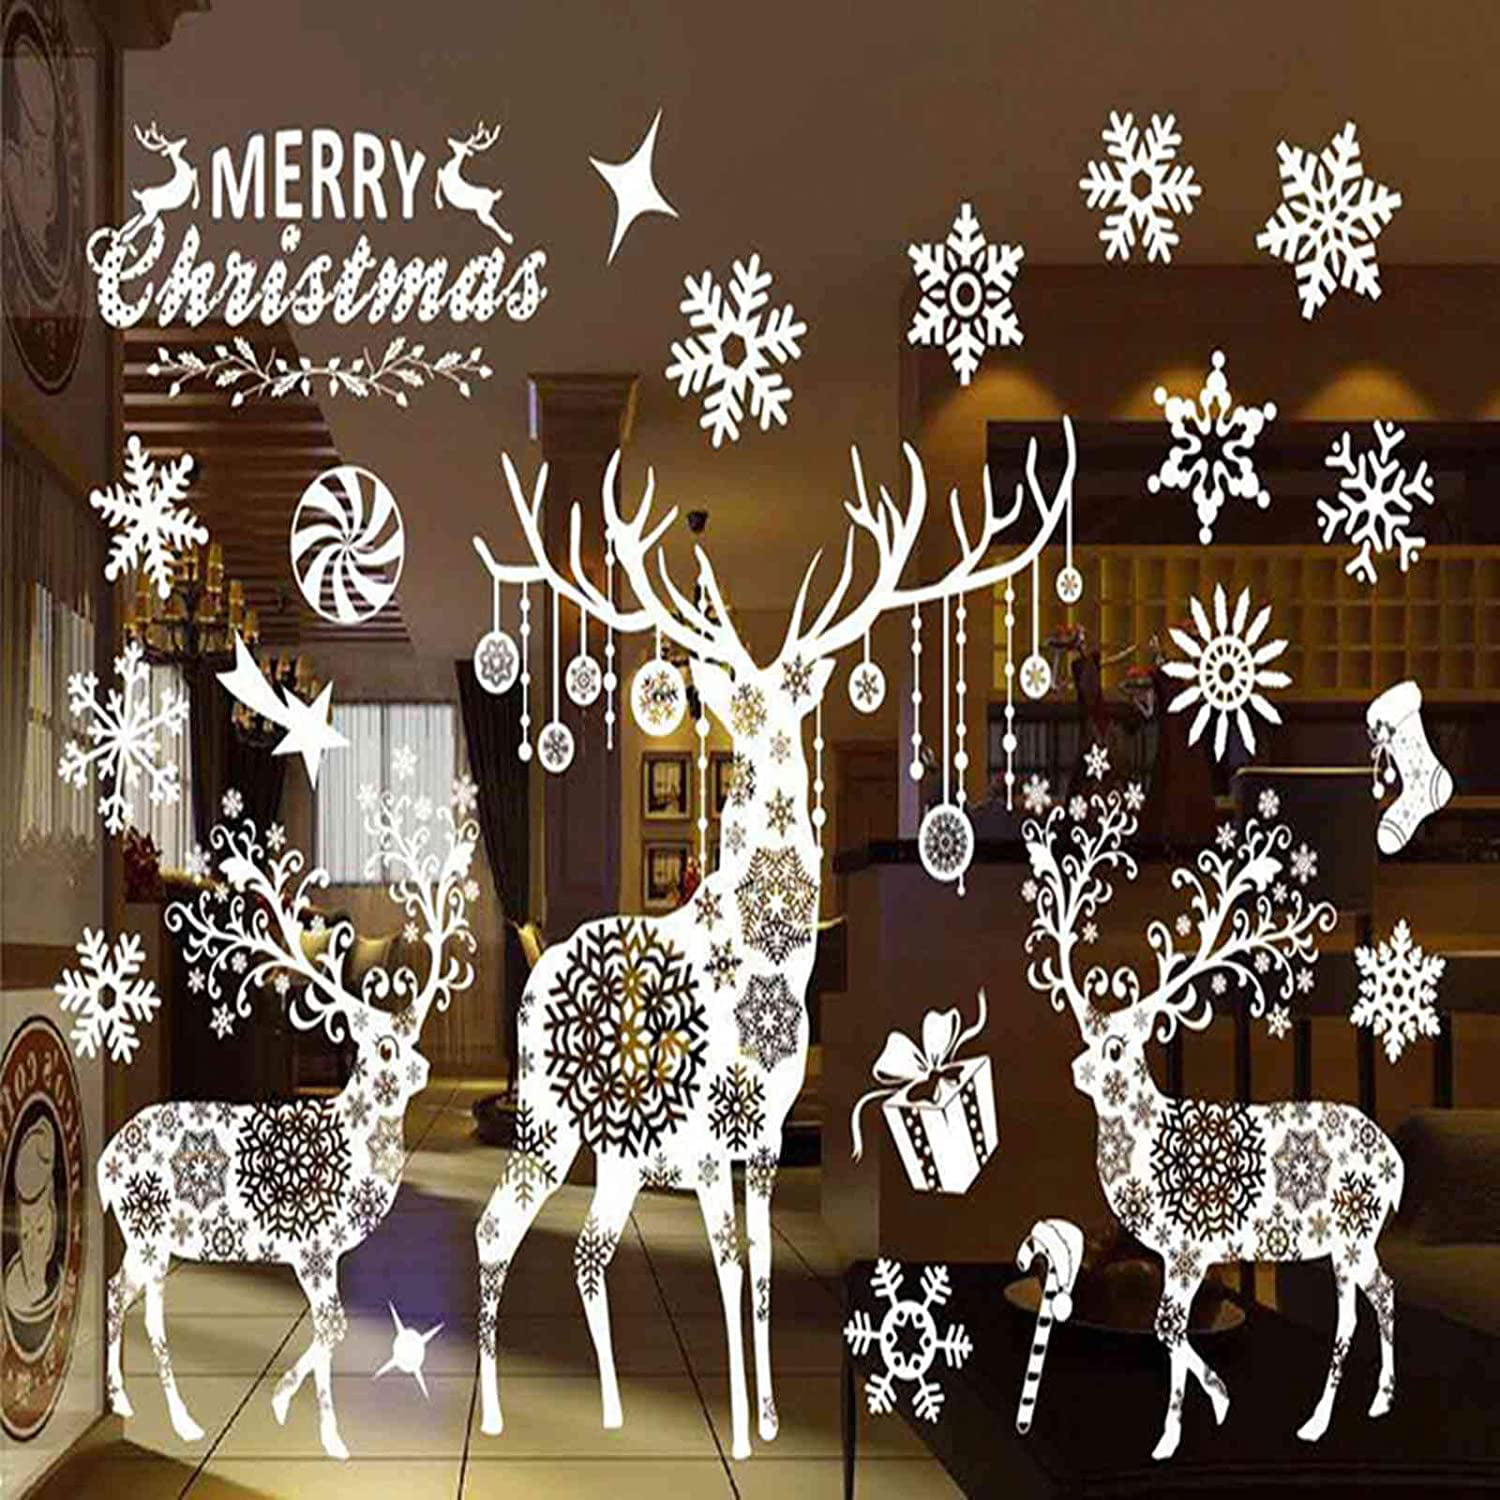 Singer Rocker Christmas Card With Reindeer Winter Sunny Landscape Switch Covers Wall Plate Graphics Wallplates